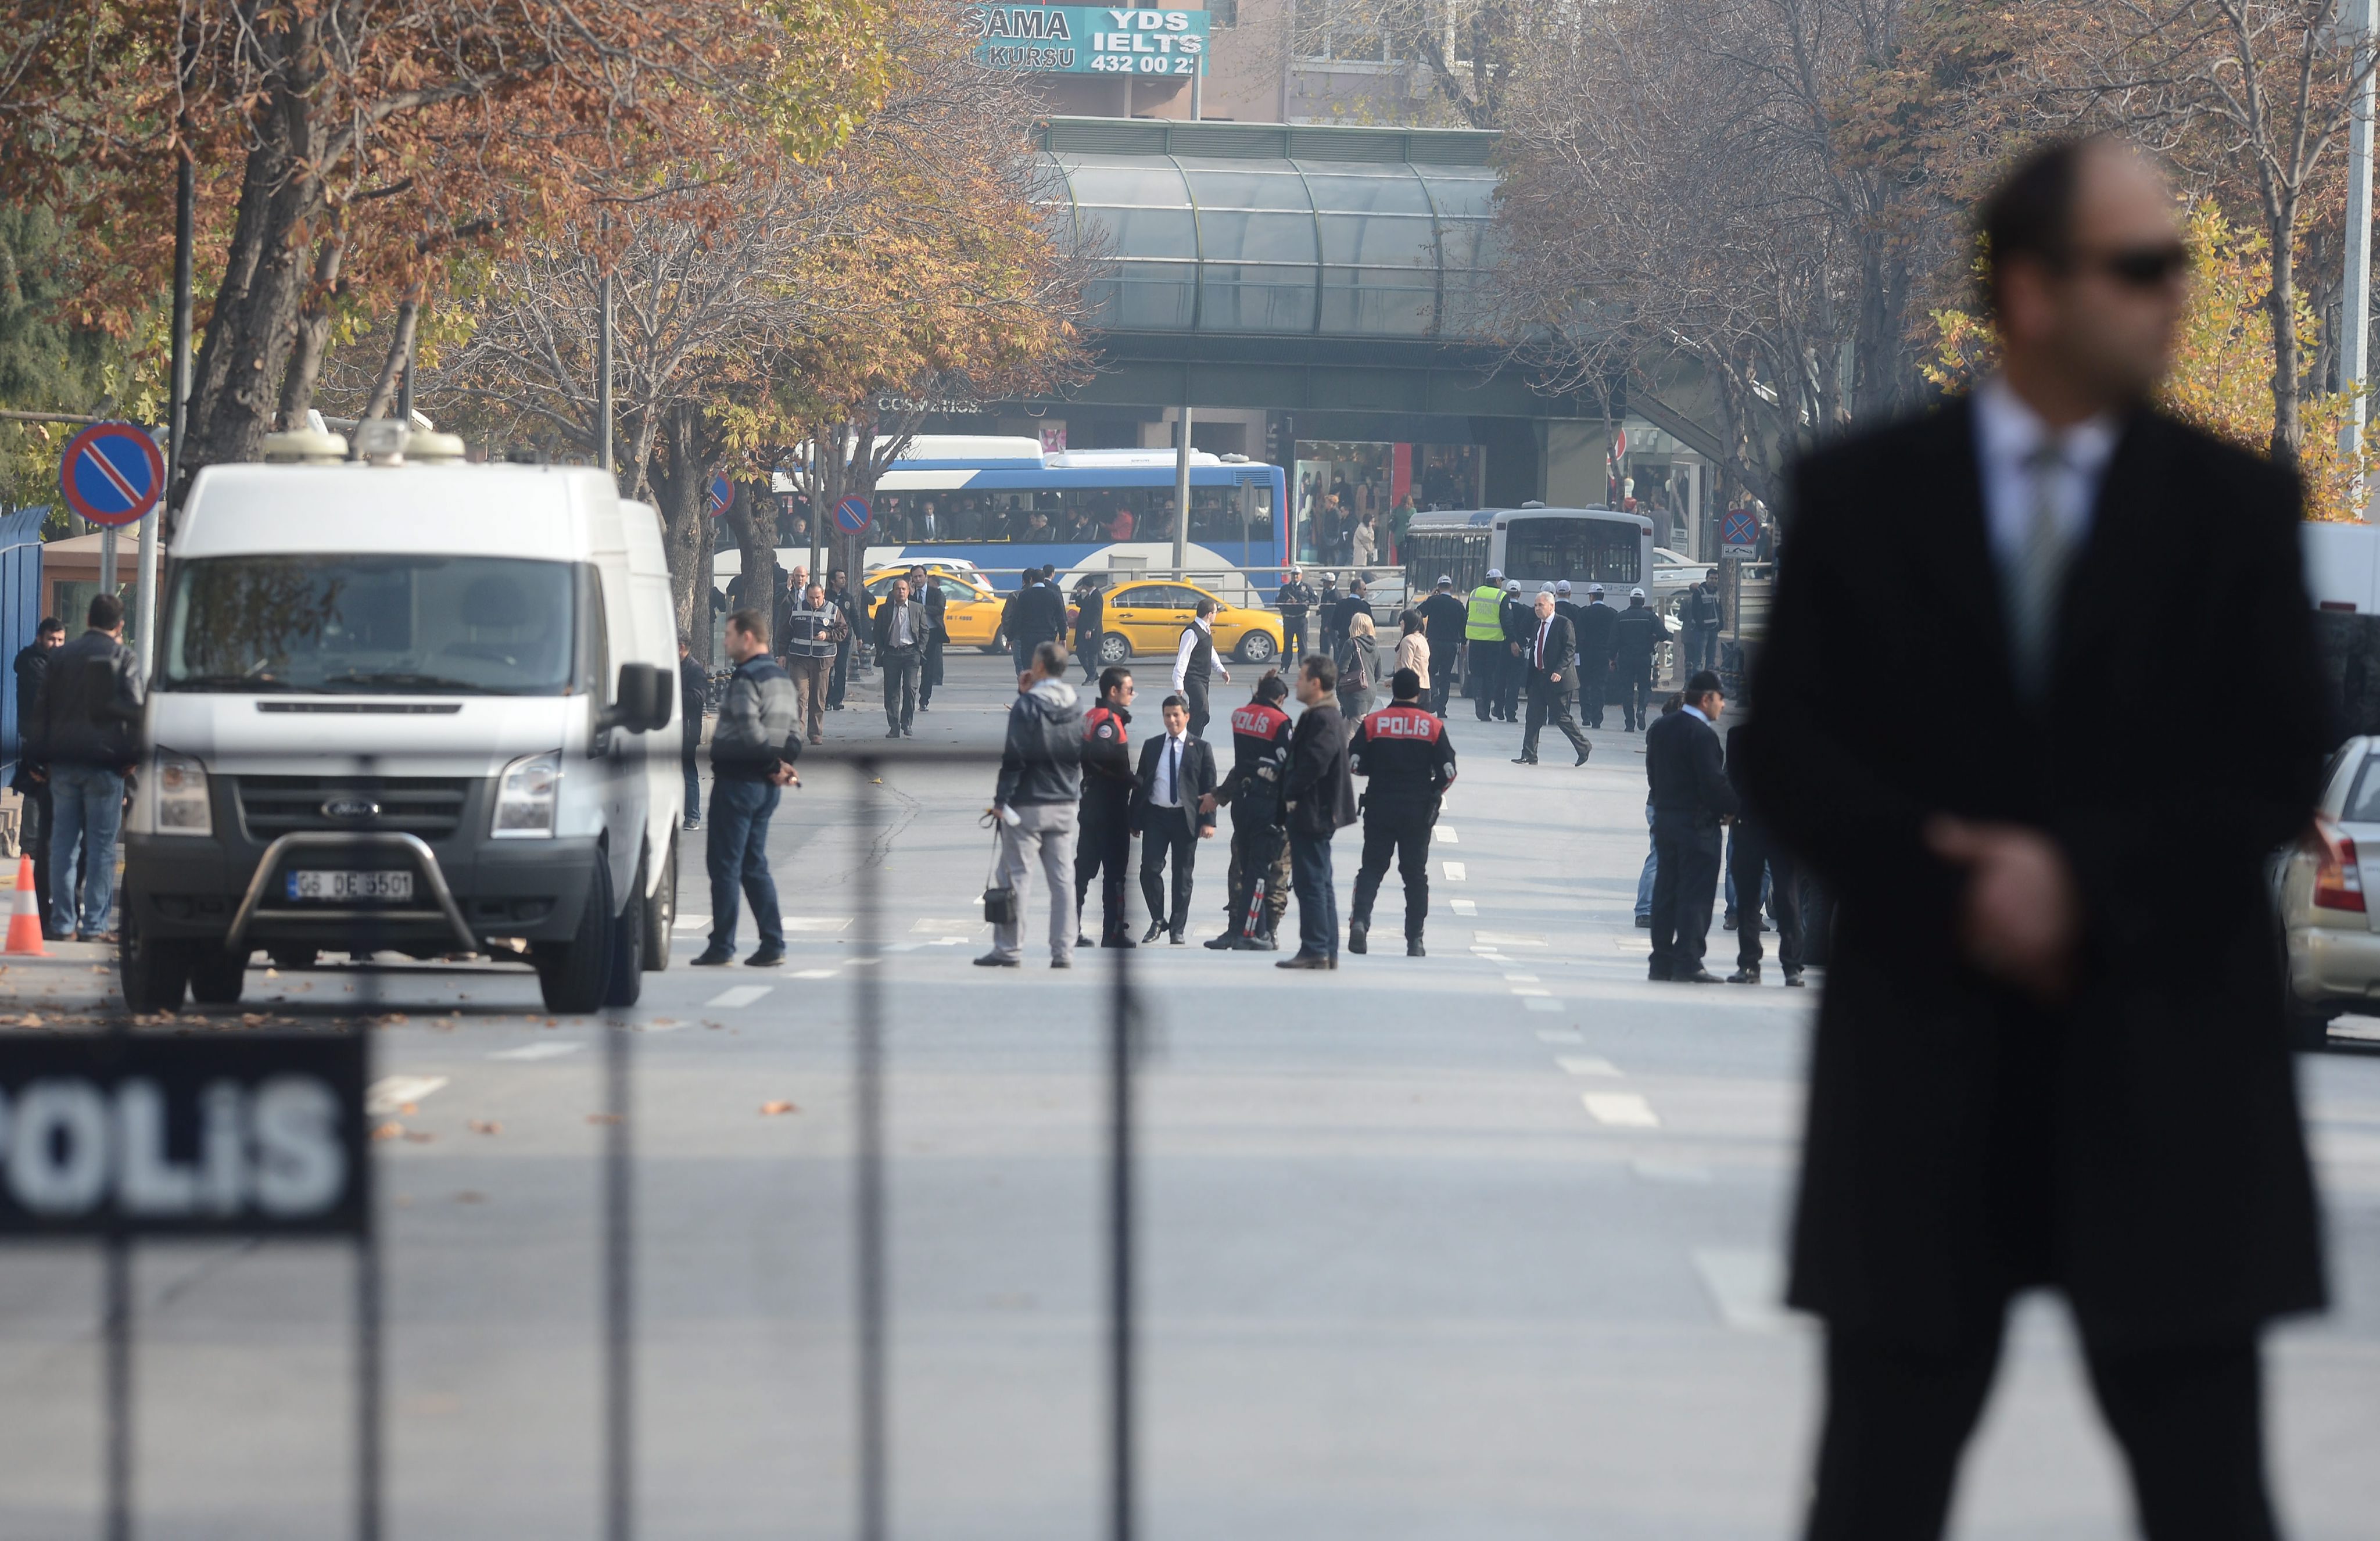 Turkish police secure the area after they shot and wounded a suspected suicide bomber close to the prime minister's office in Ankara. Photo: EPA